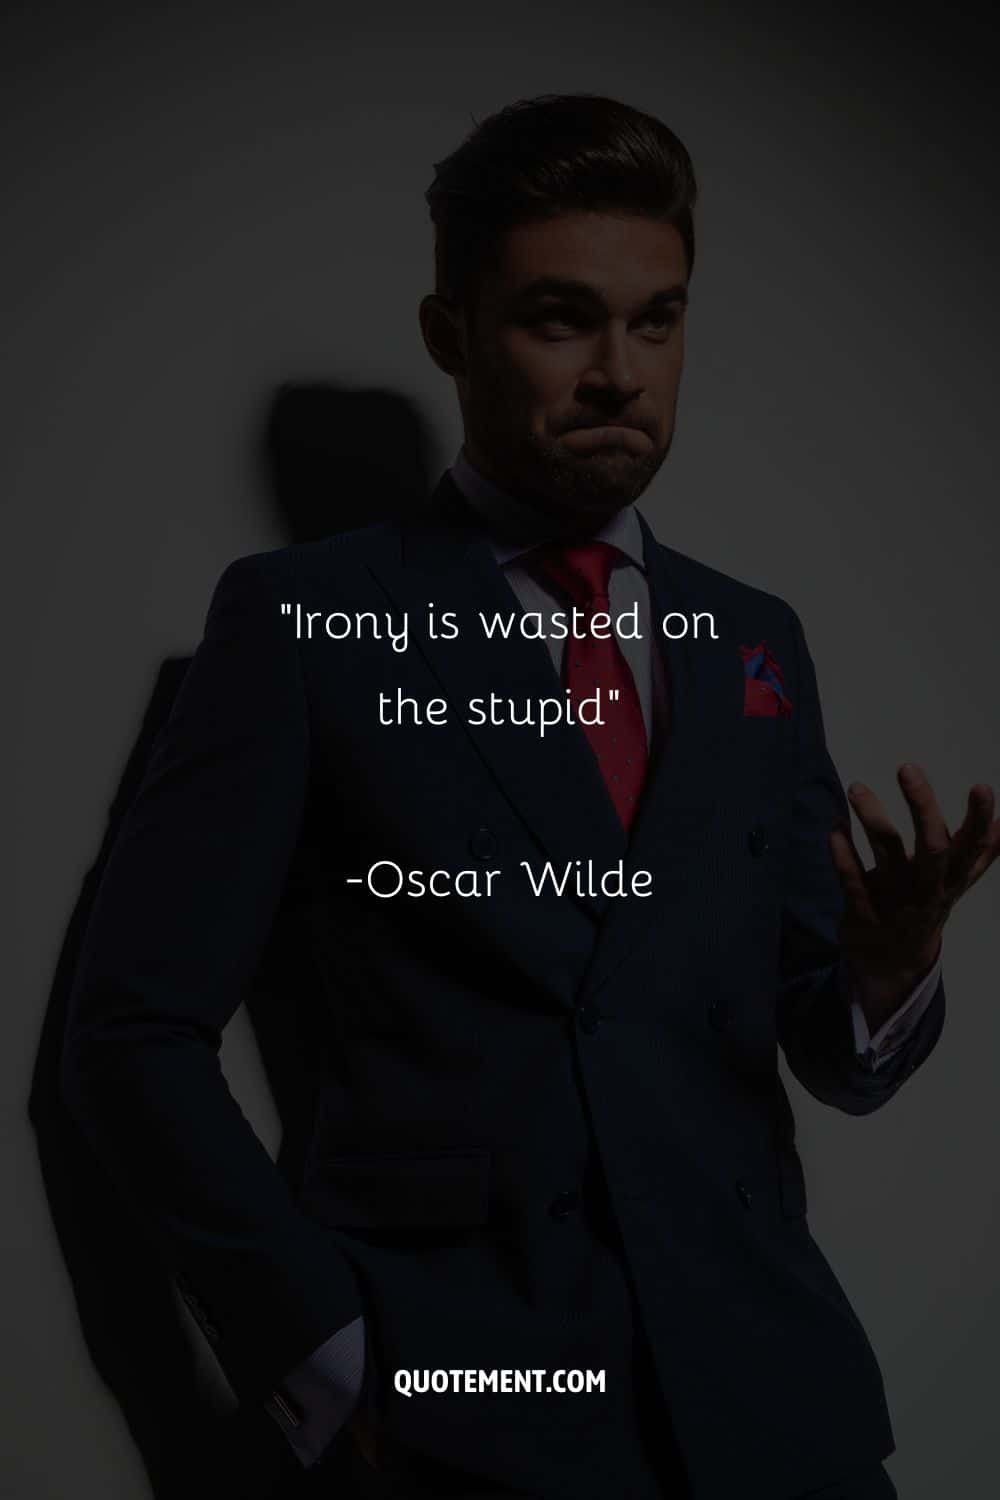 “Irony is wasted on the stupid”